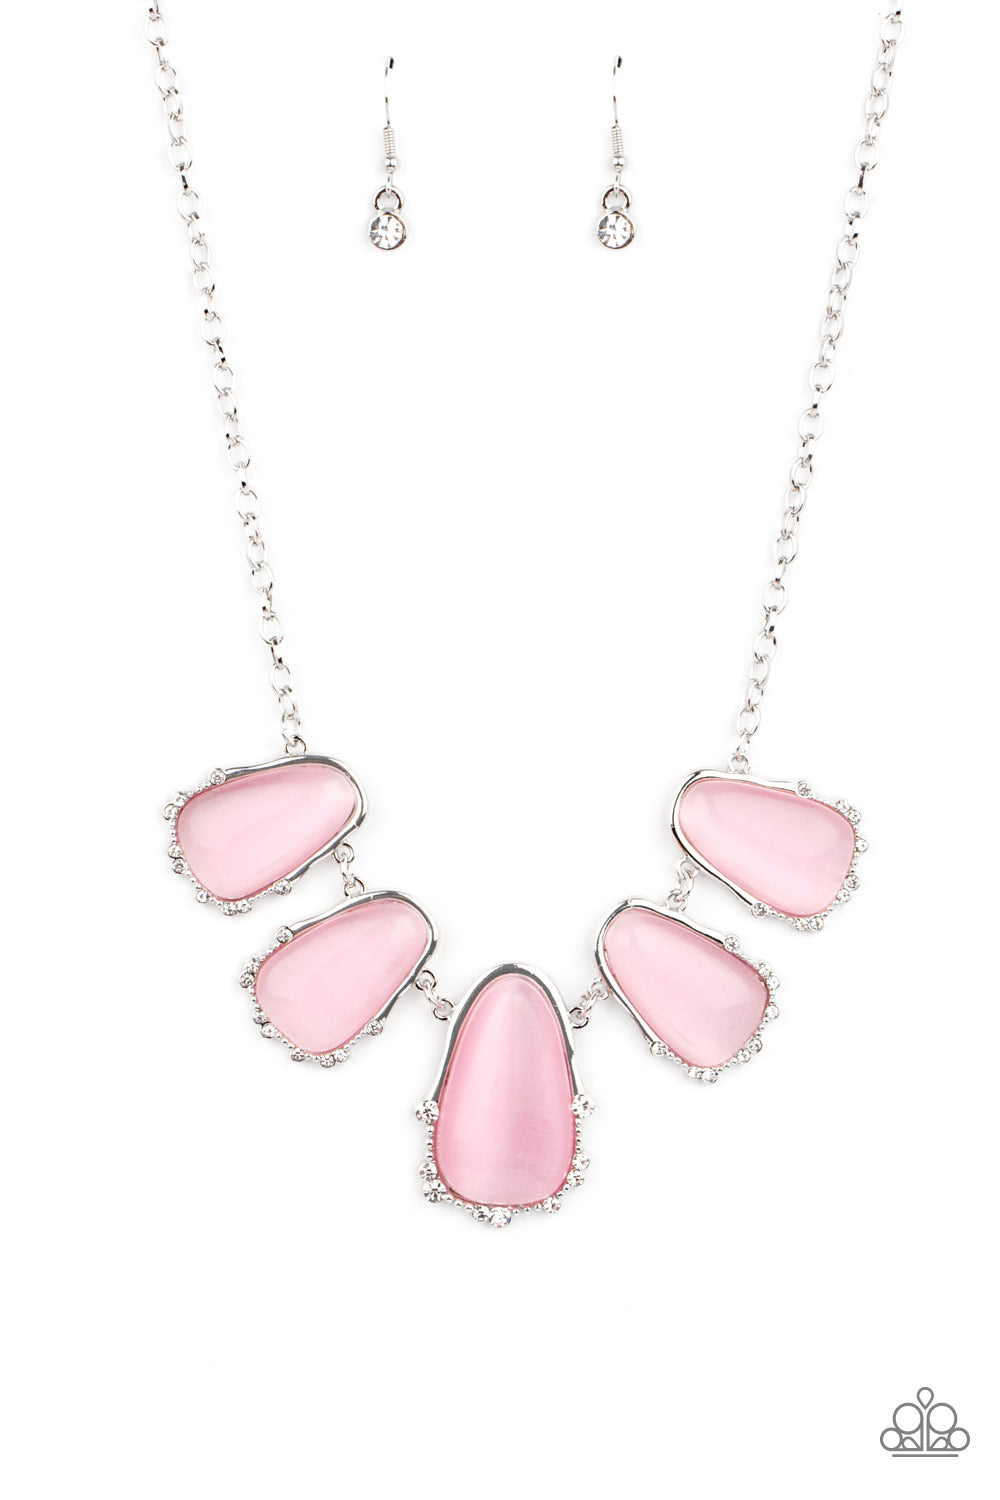 Newport Princess Pink Necklace - Paparazzi Accessories  A collection of asymmetrical pink cat’s eye stone teardrops are encased inside imperfect silver frames as they delicately link below the collar. The dainty silver frames are sporadically dotted in dainty silver studs and glassy white rhinestones, adding delicate sparkle to the ethereal display. Features an adjustable clasp closure.  All Paparazzi Accessories are lead free and nickel free!  Includes one pair of matching earrings.